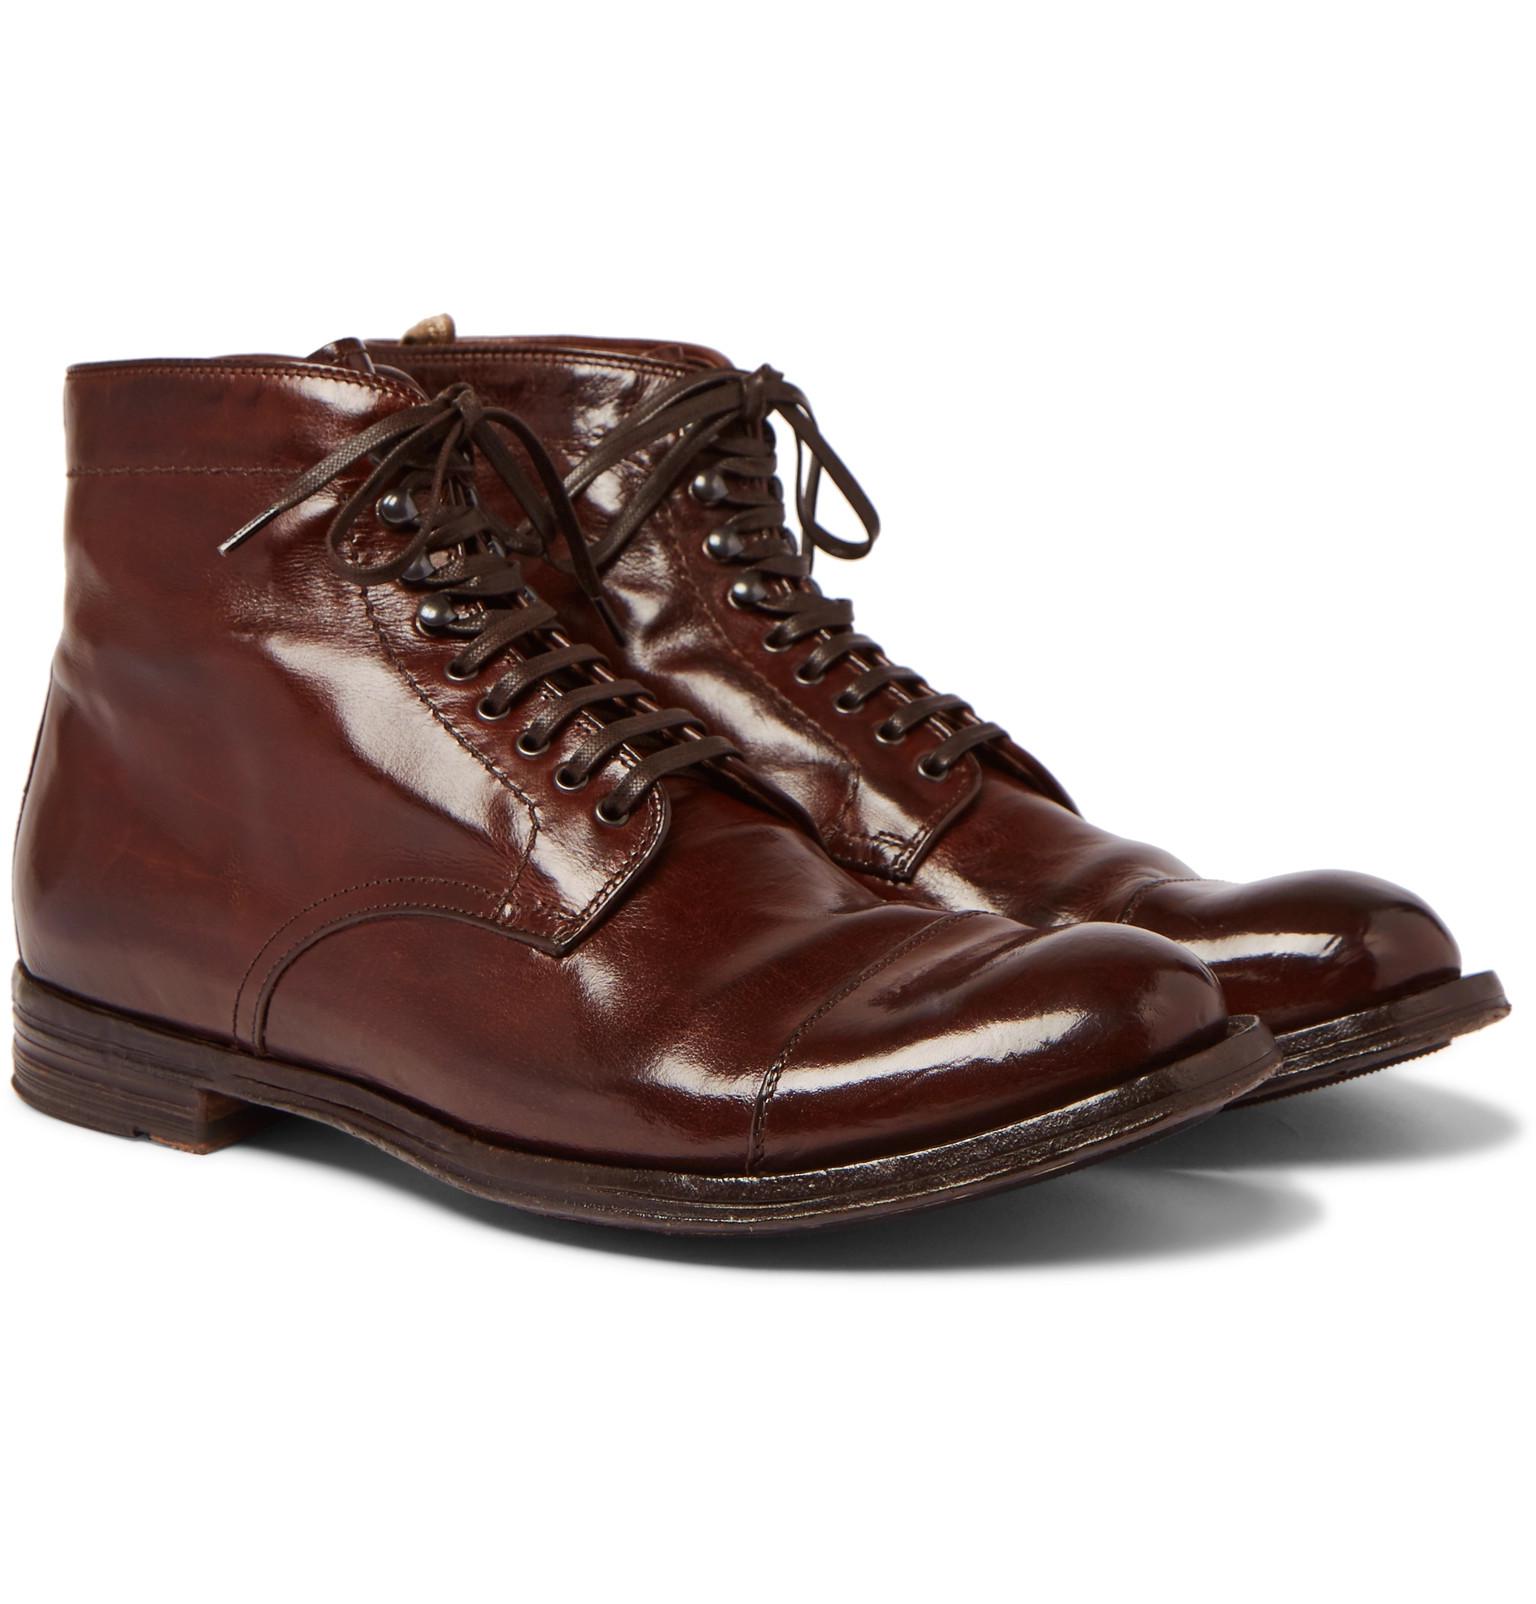 Officine Creative Anatomia Burnished-leather Derby Boots in Dark Brown  (Brown) for Men - Lyst